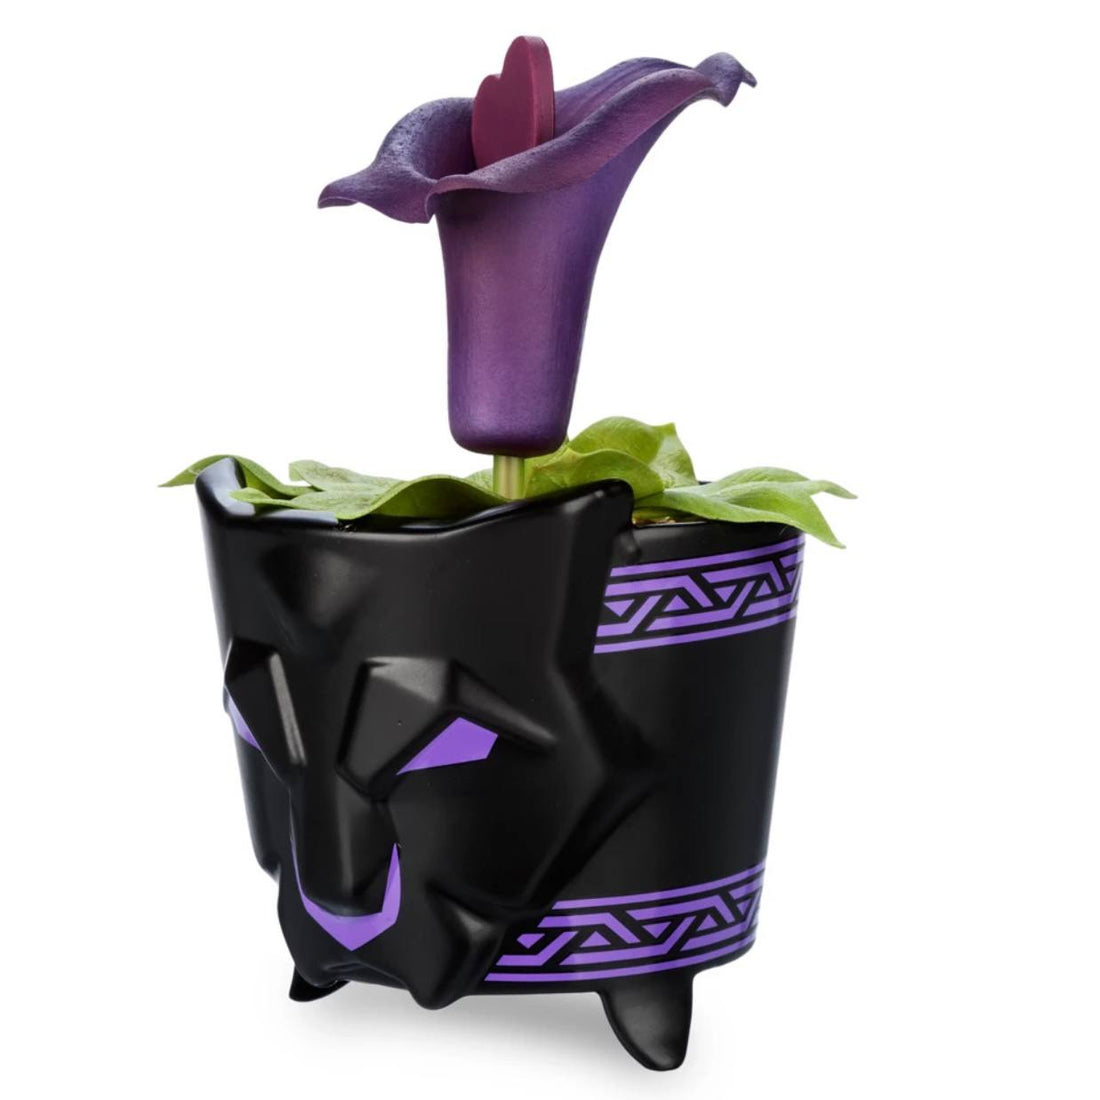 Disney Store Black Panther: World of Wakanda Artificial Potted Plant